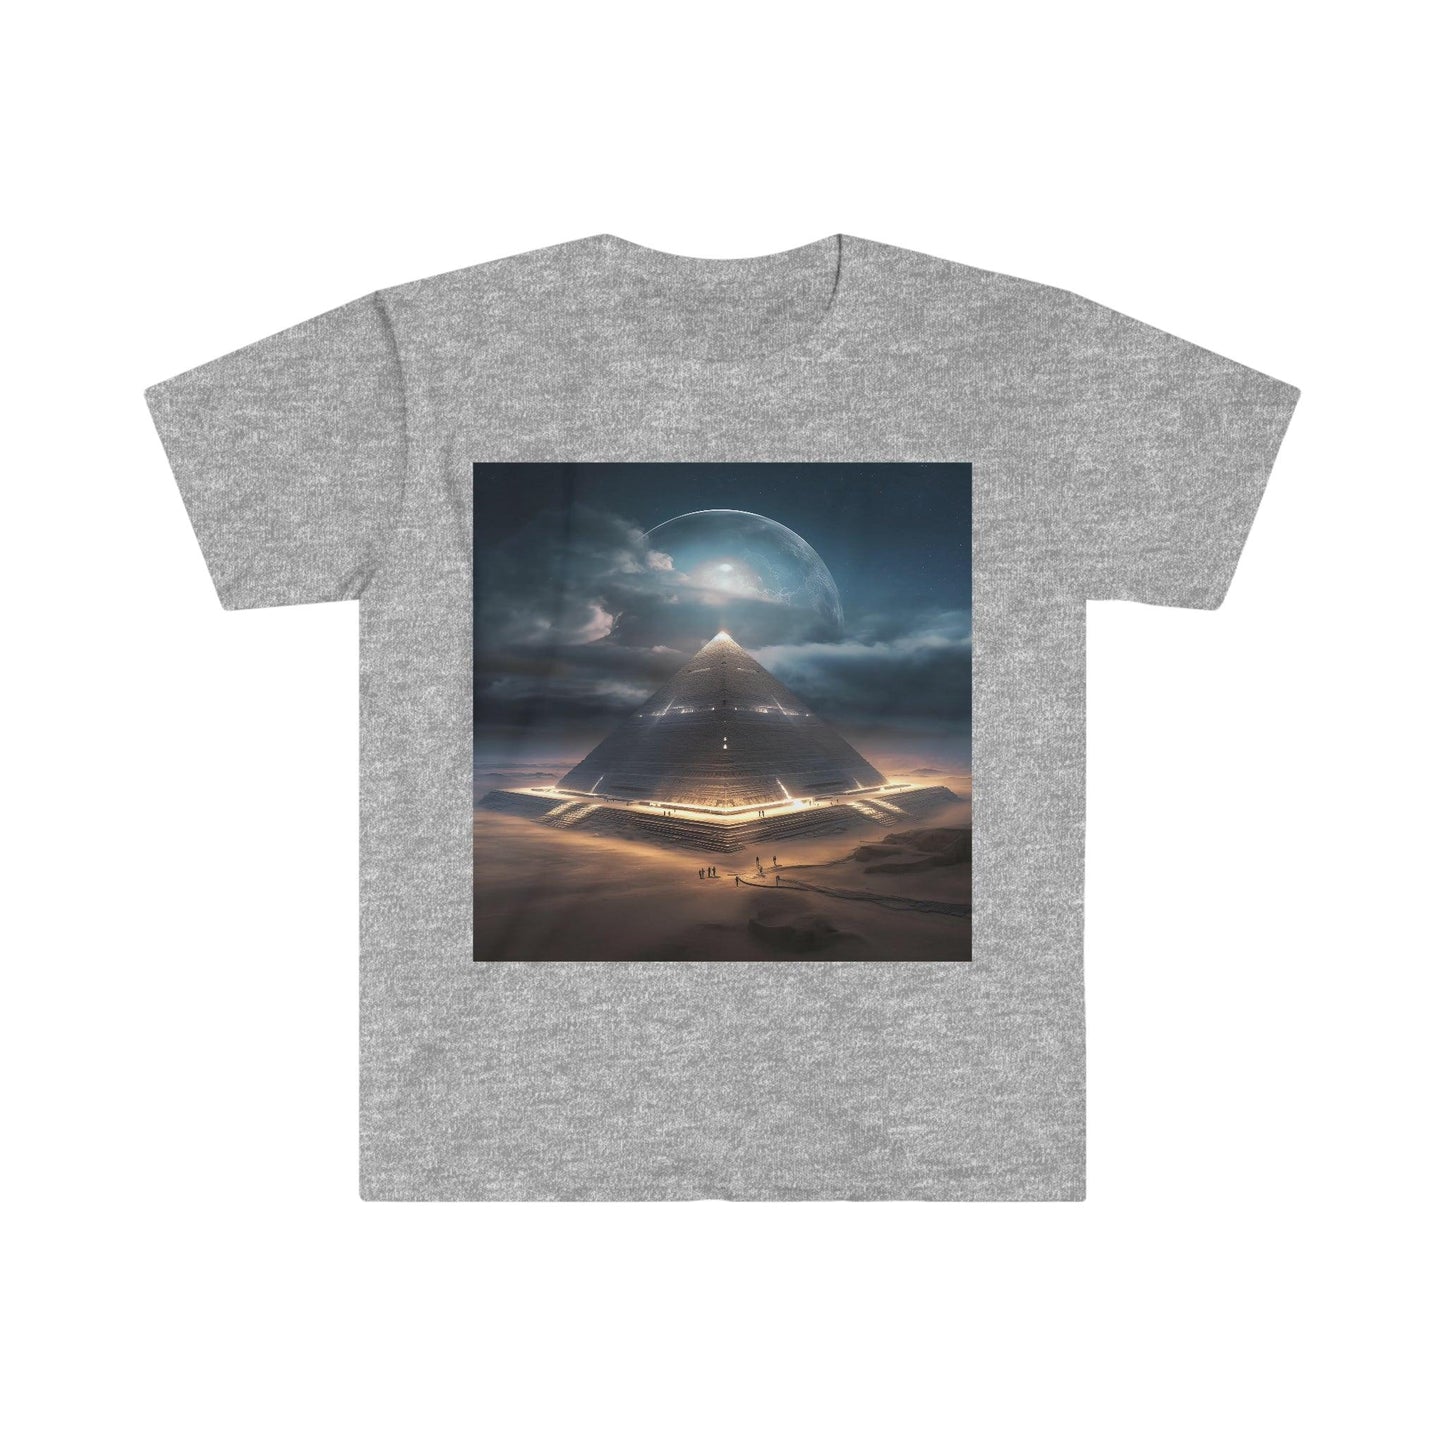 Cameron's Journey to the Eclipse at The Egyptian Pyramids - Visionary Psychedelic Ai Art Men's and Women's Unisex Soft Style T-Shirt for Festival and Street Wear - Alchemystics.org